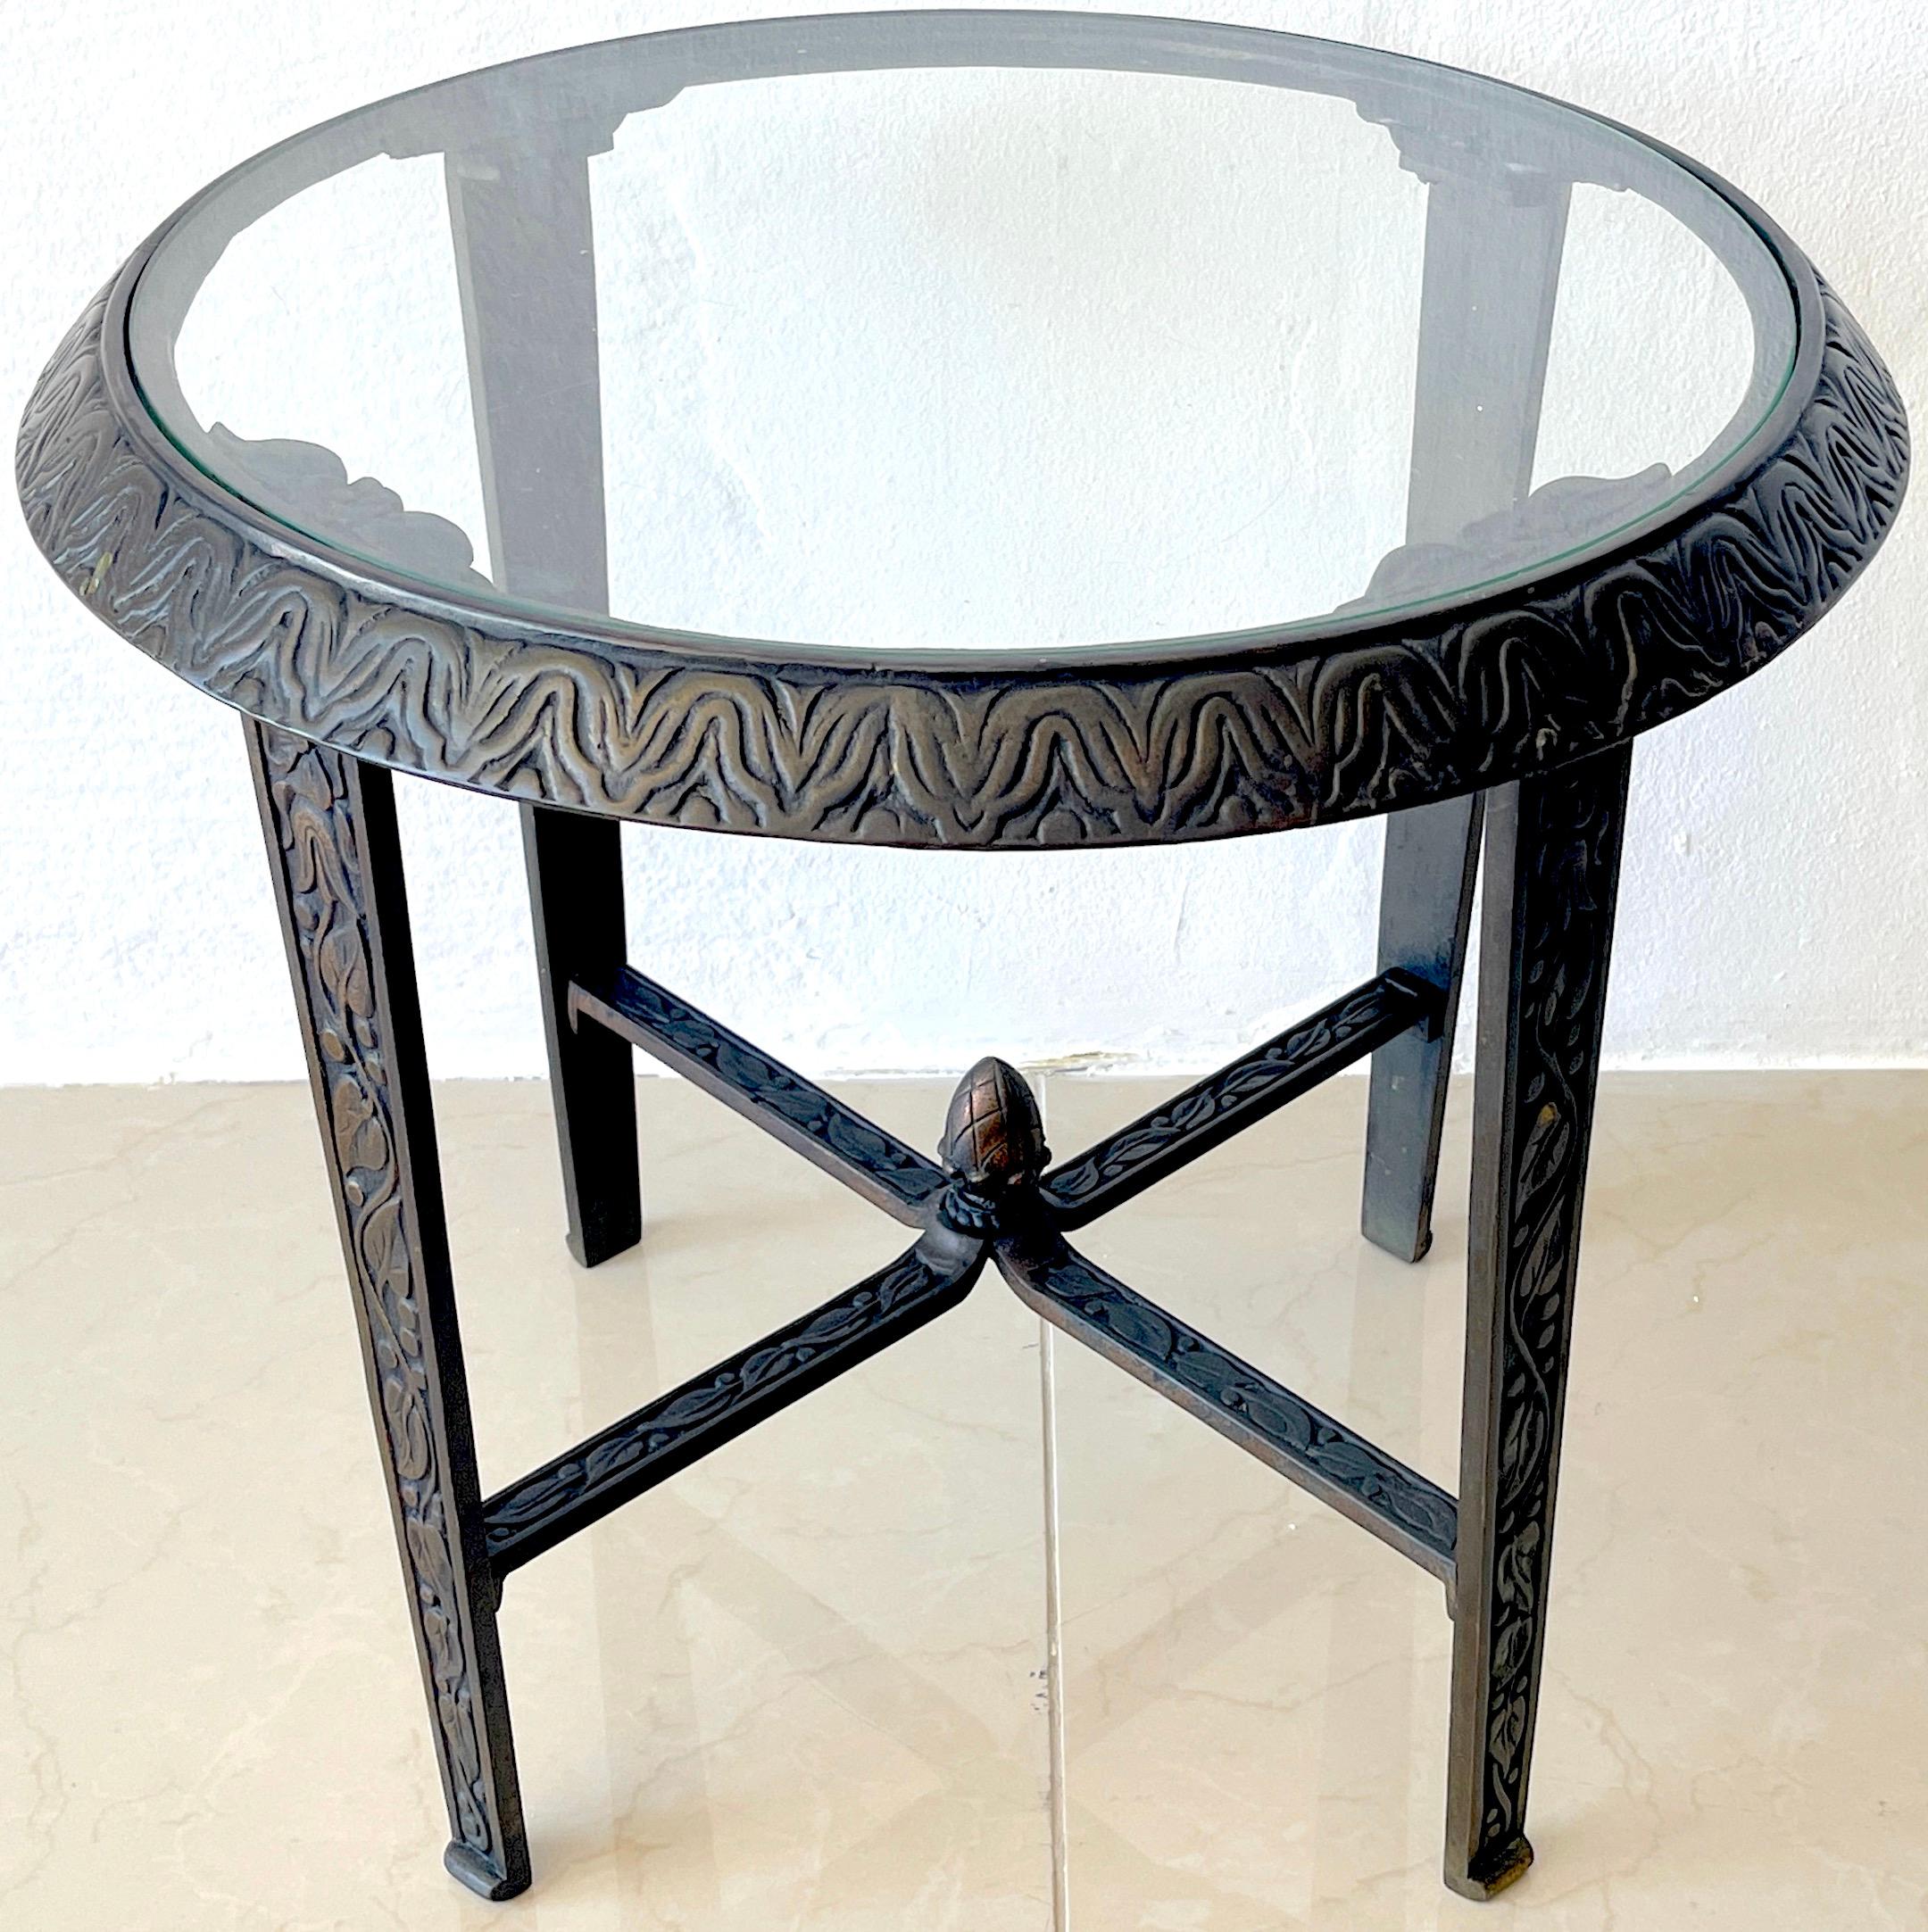 French Art Deco bronze & glass side table, style of Edgar Brandt. With inset 18-Inch diameter clear glass top, Beautifully cast with stylized architectural elements, leaves, berries, raised on four columnar legs joined with an 'x' stretcher with